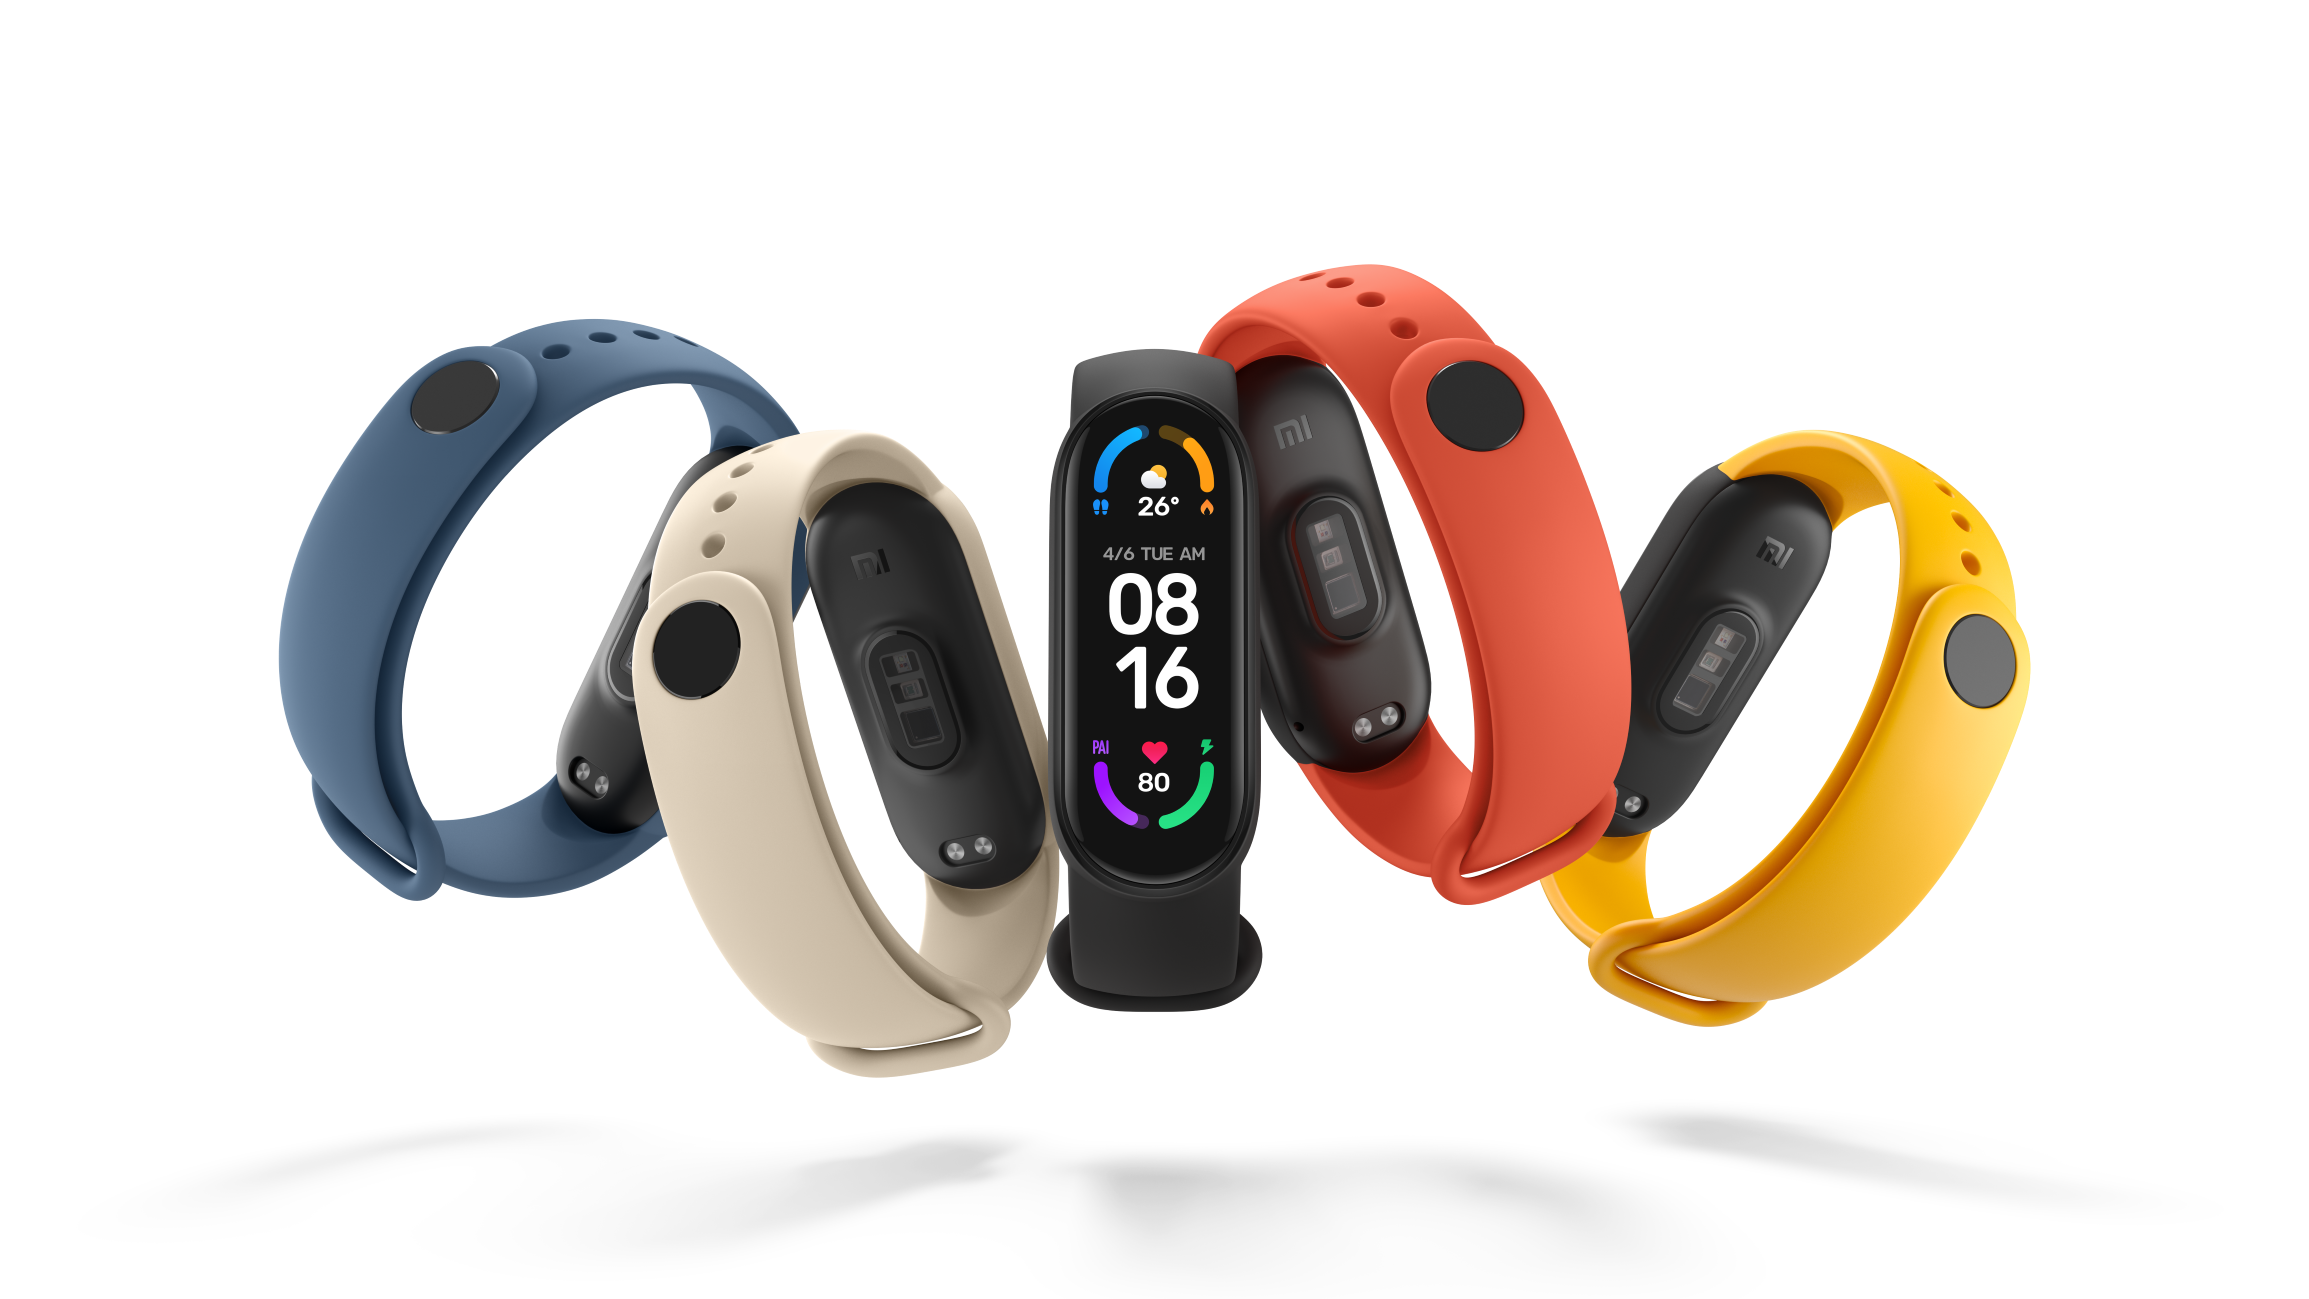 The Xiaomi Mi Smart Band 6 ups the budget fitness tracking game